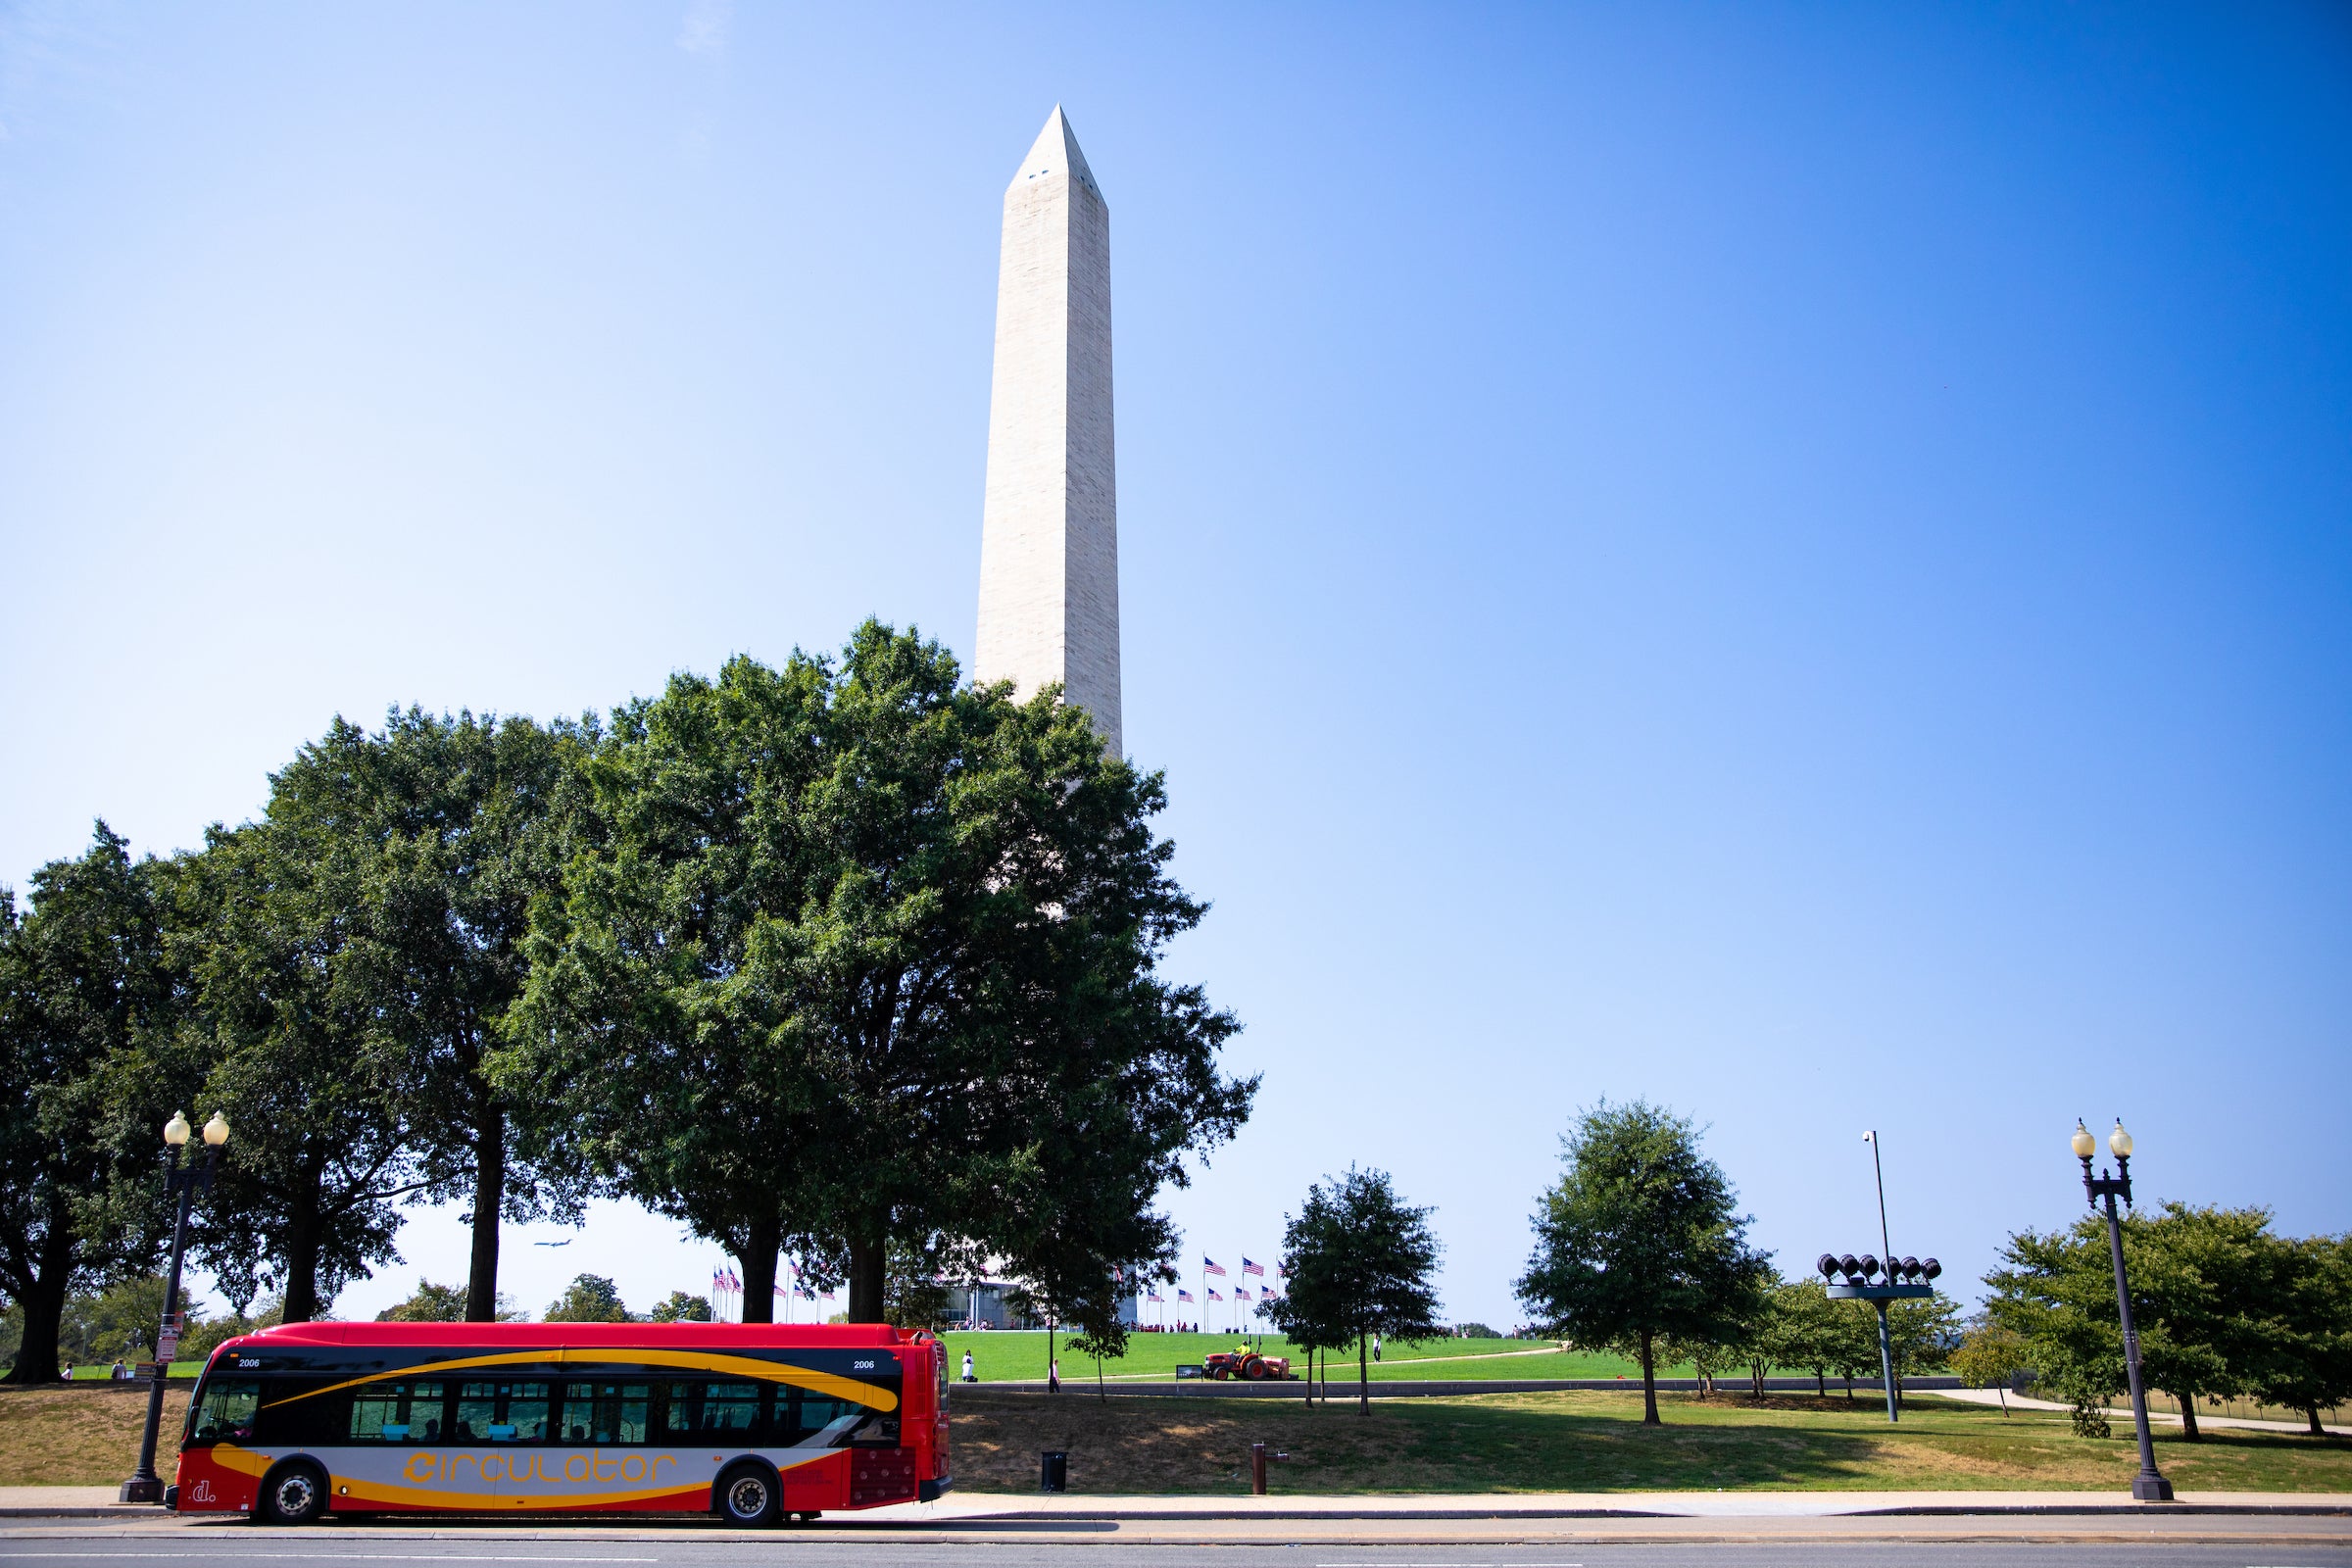 DC circulator in front of Washington Monument